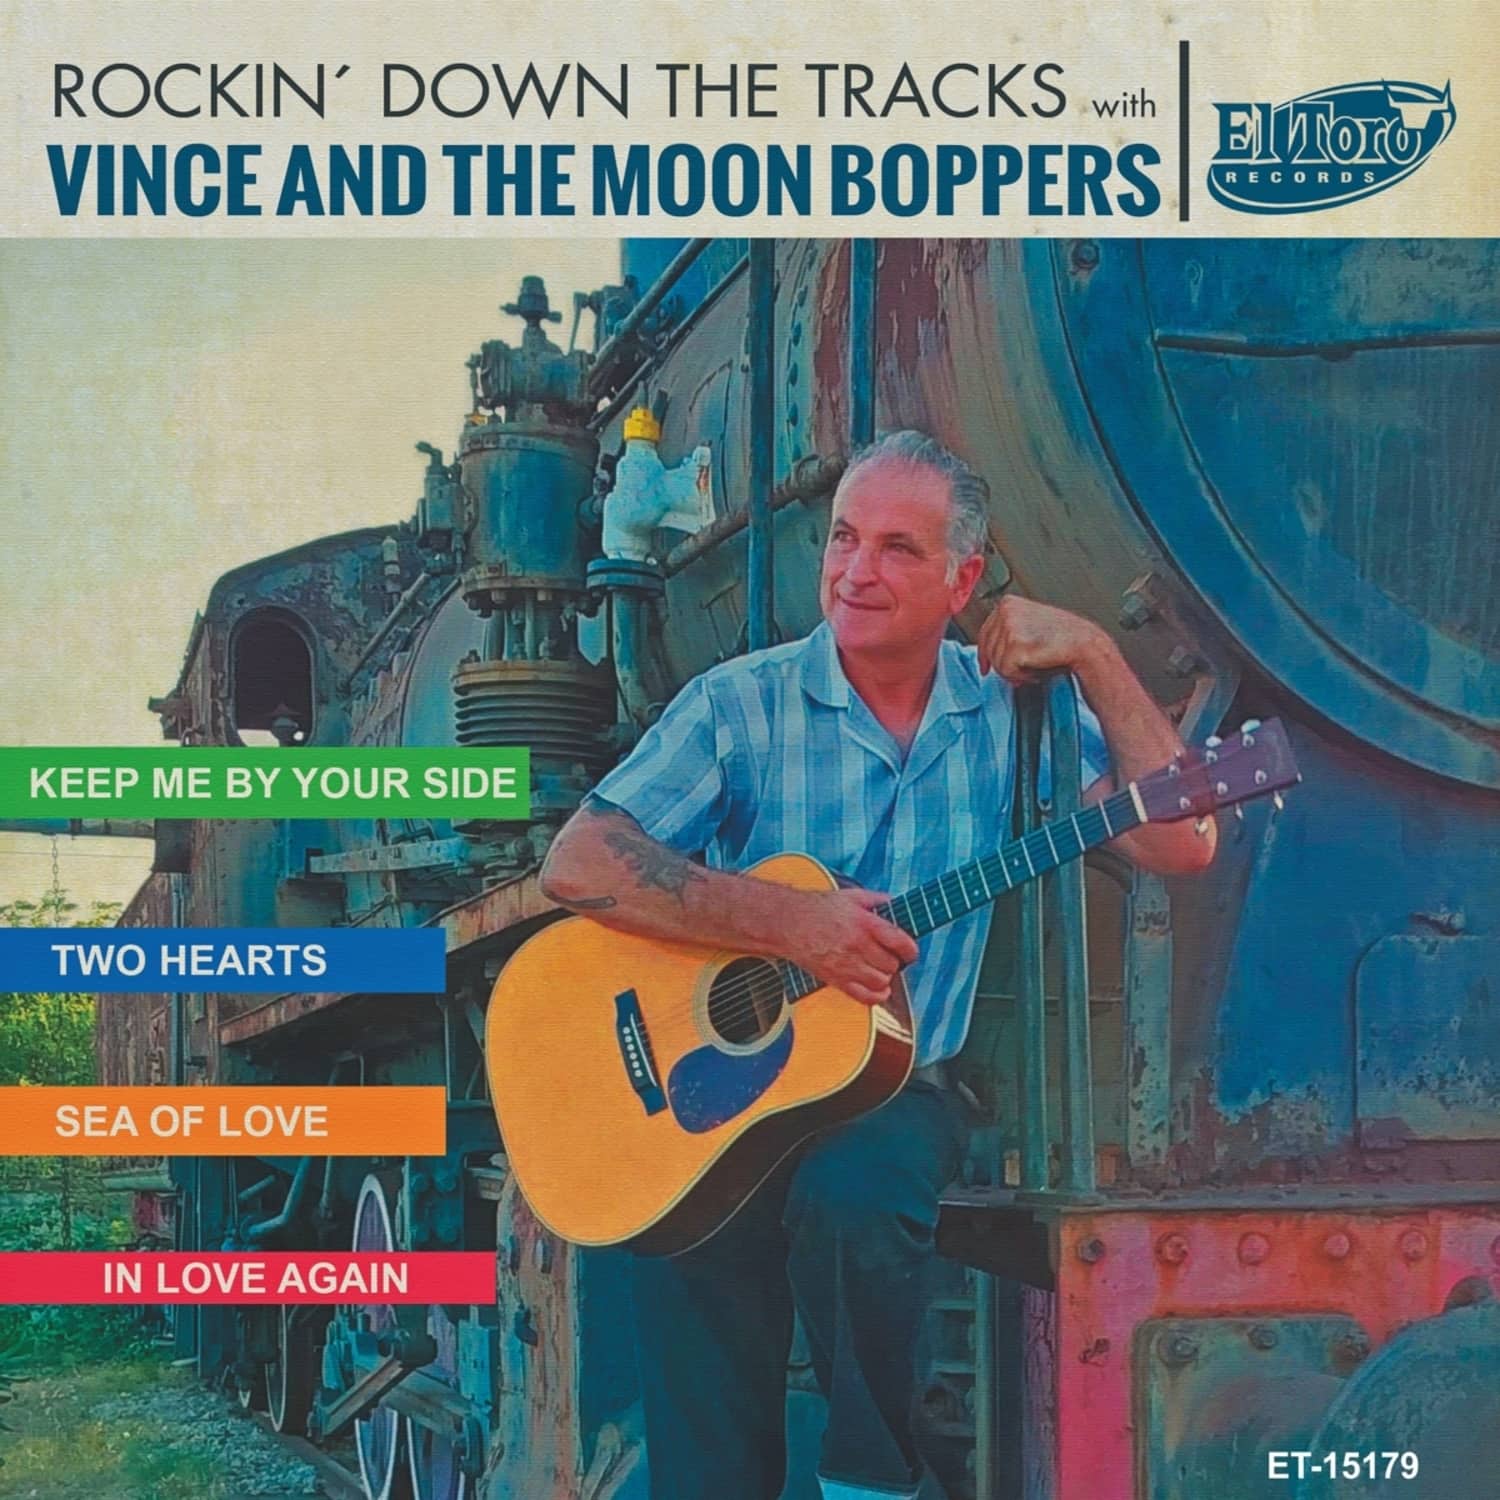 Vince and the Moon Boppers - ROCKIN DOWN THE TRACKS 